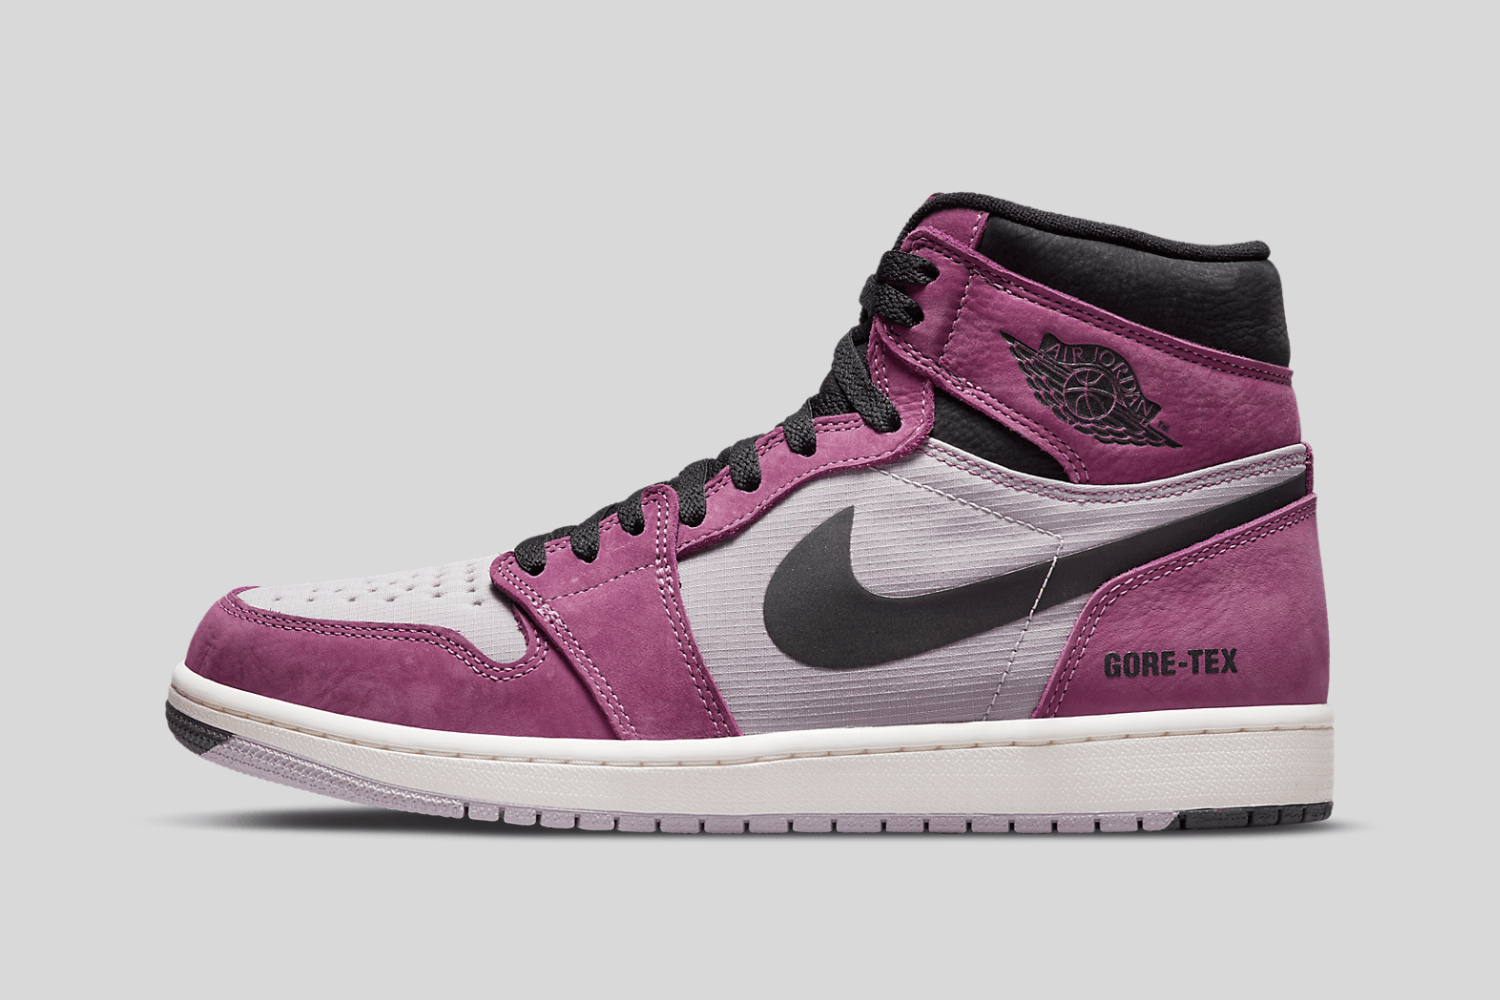 Official images of the Air Jordan 1 High GORE-TEX 'Berry'